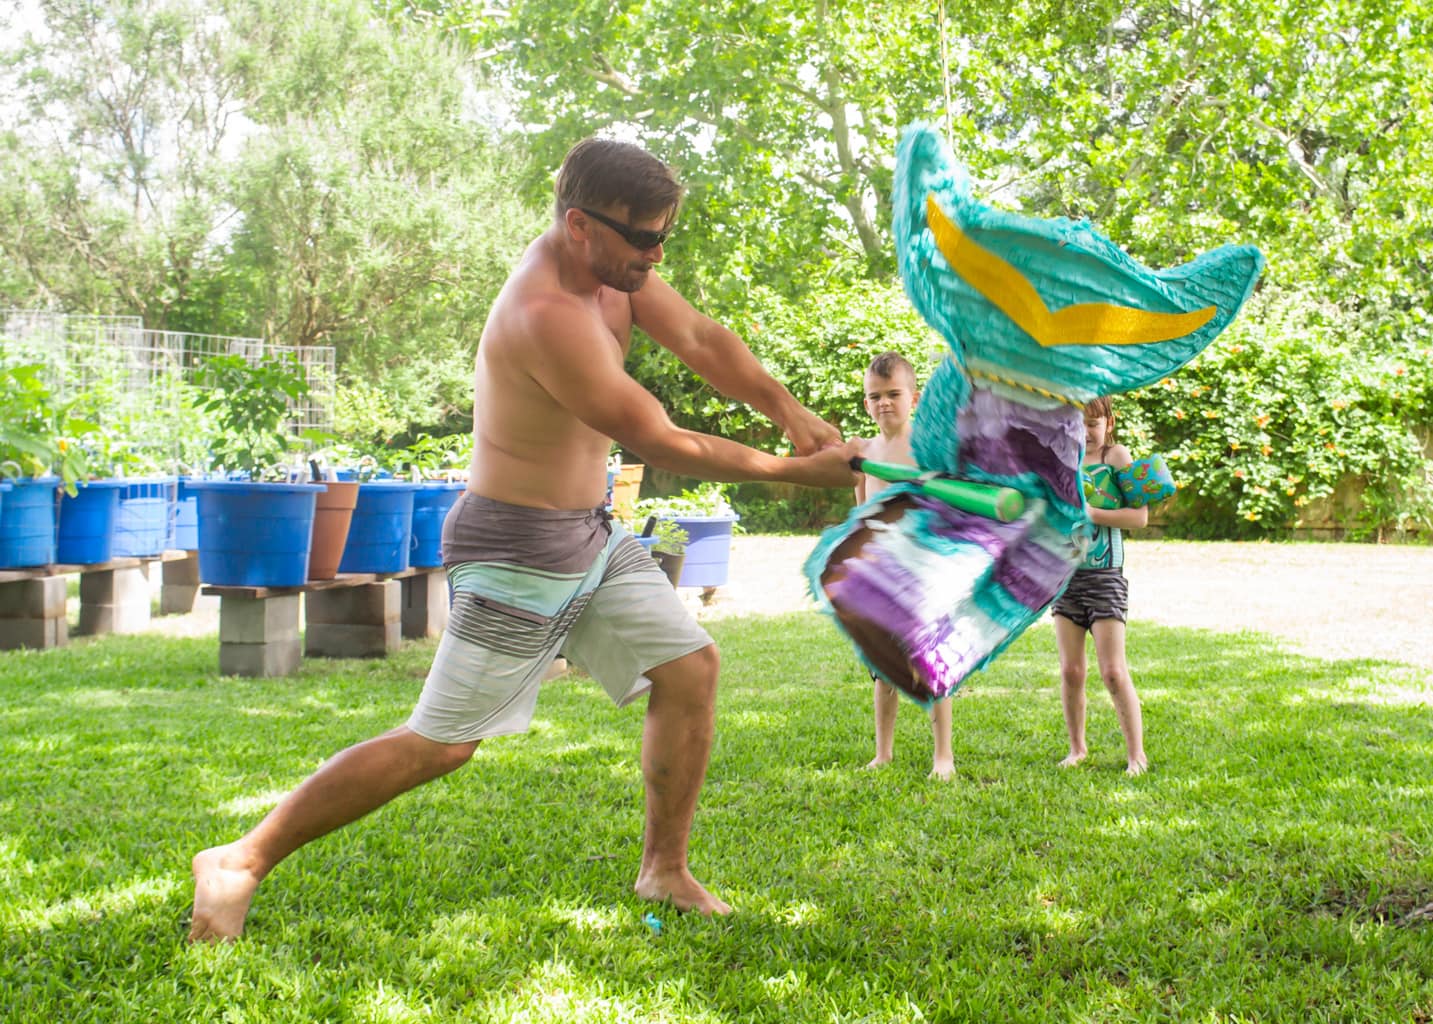 2021 Best Photos: My brother crushing a piñata 